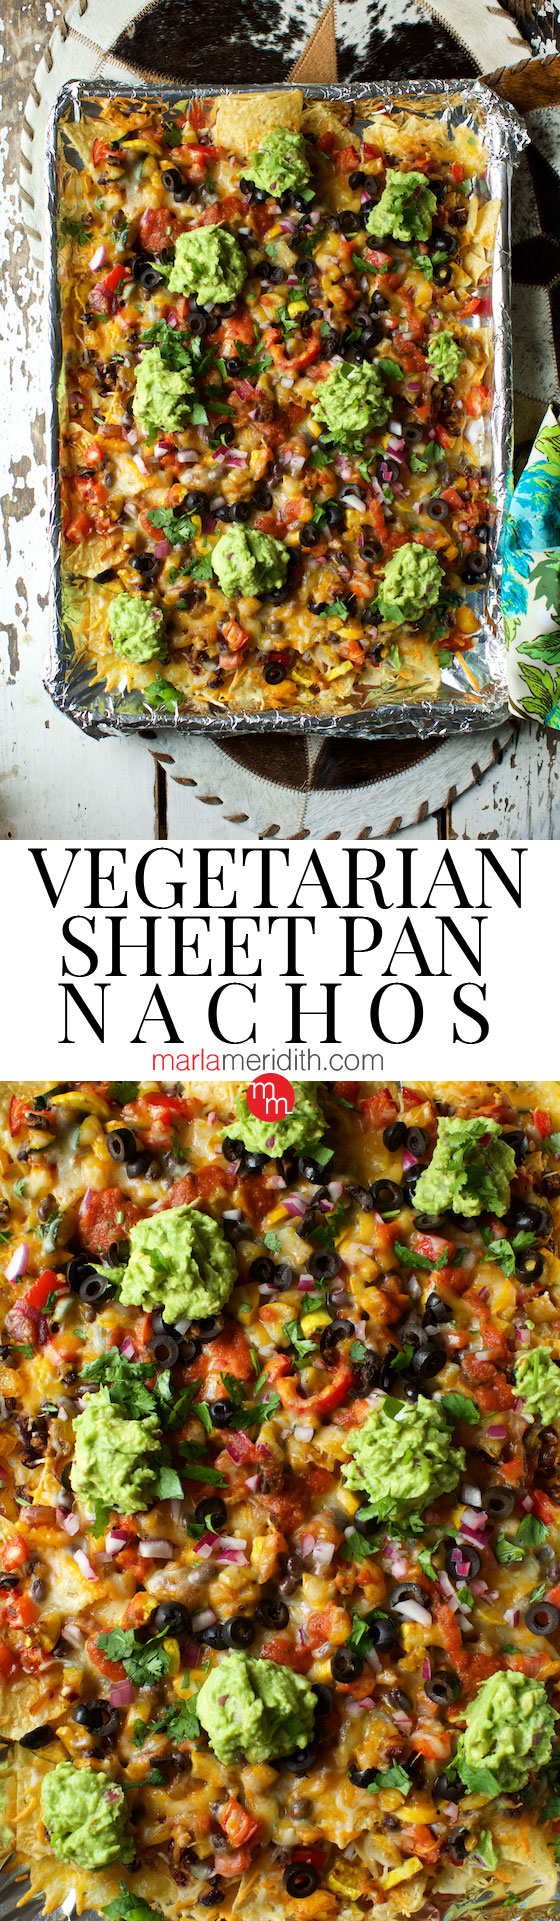 Vegetarian Sheet Pan Nachos recipe, the best nachos you will ever eat! Serve for family dinners and Cinco de Mayo. MarlaMeridith.com ( @marlameridith )